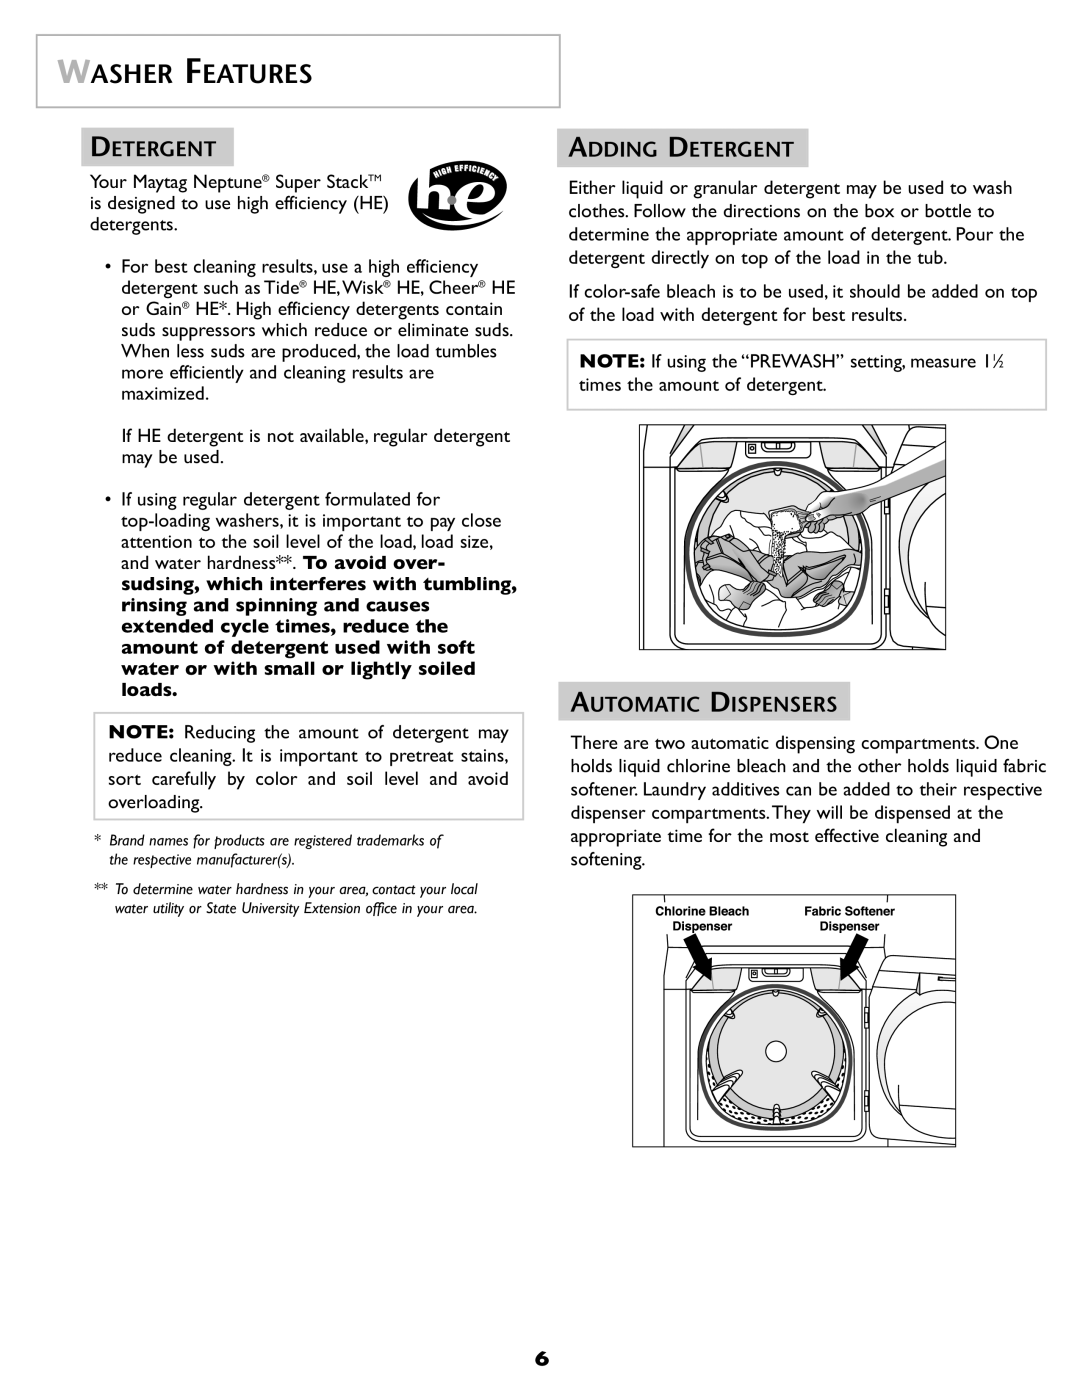 Maytag SL-3 important safety instructions Washer Features, Adding Detergent, Automatic Dispensers 